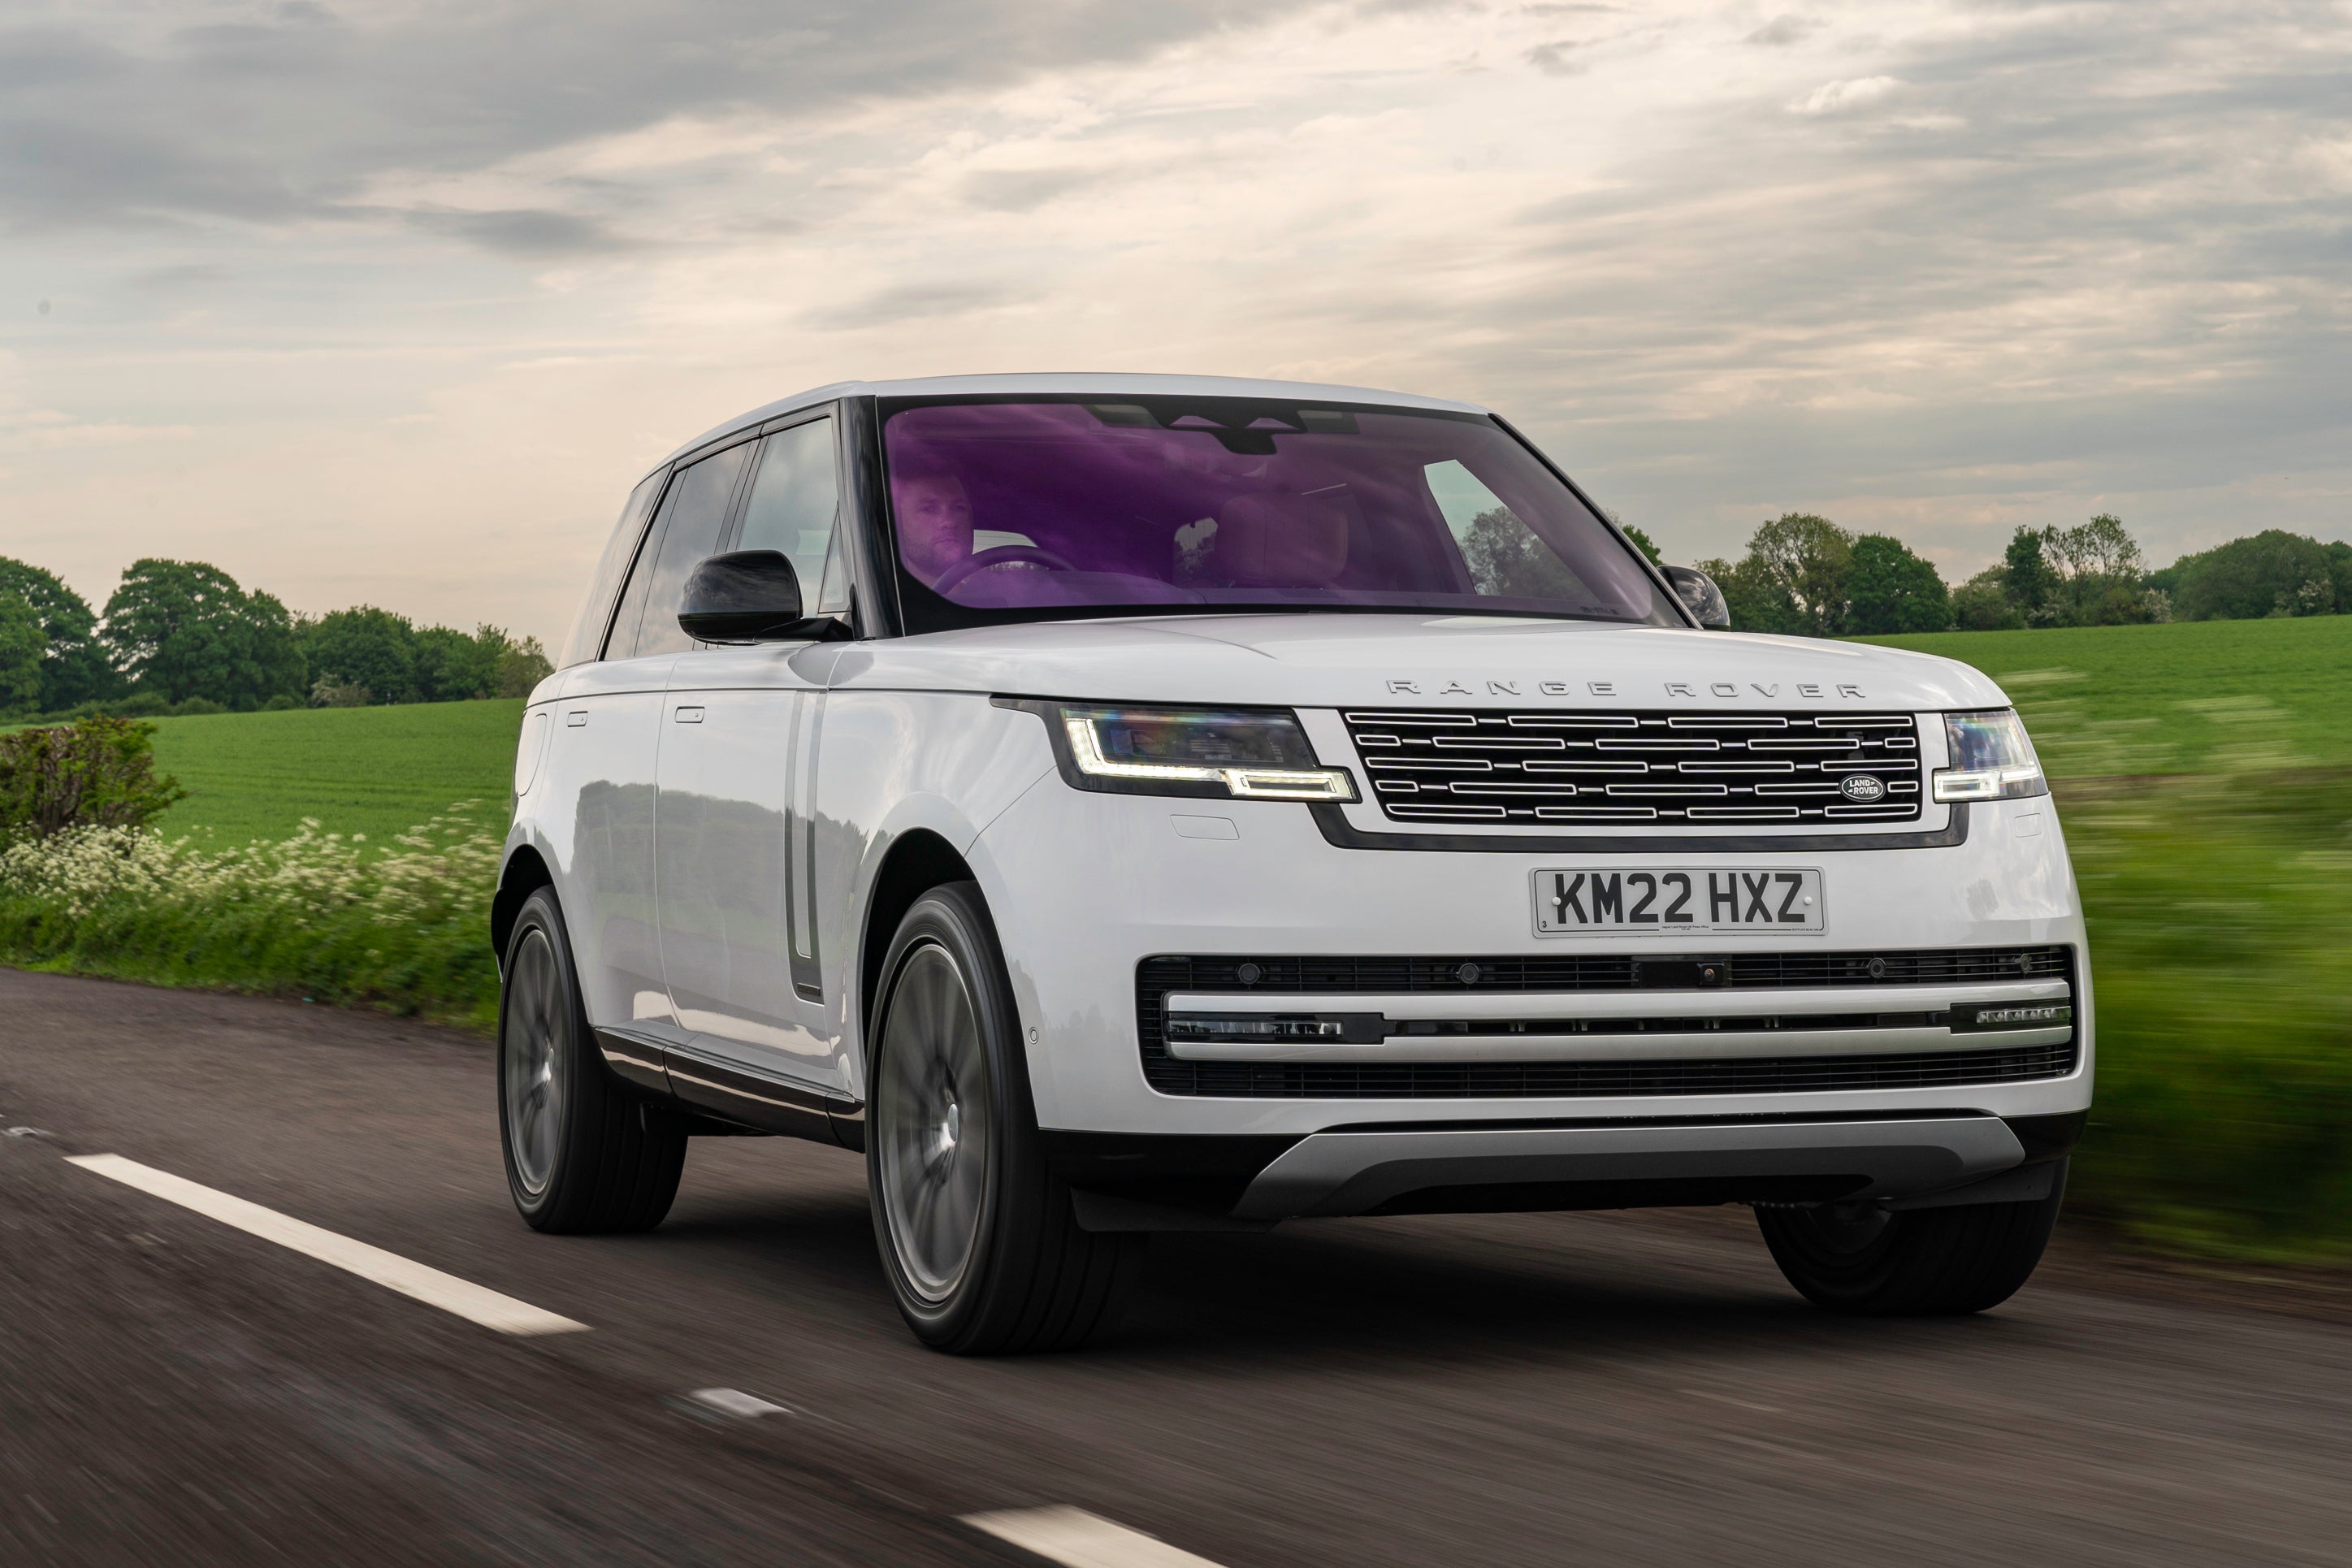 Range Rover Autobiography review: There's still nothing quite like